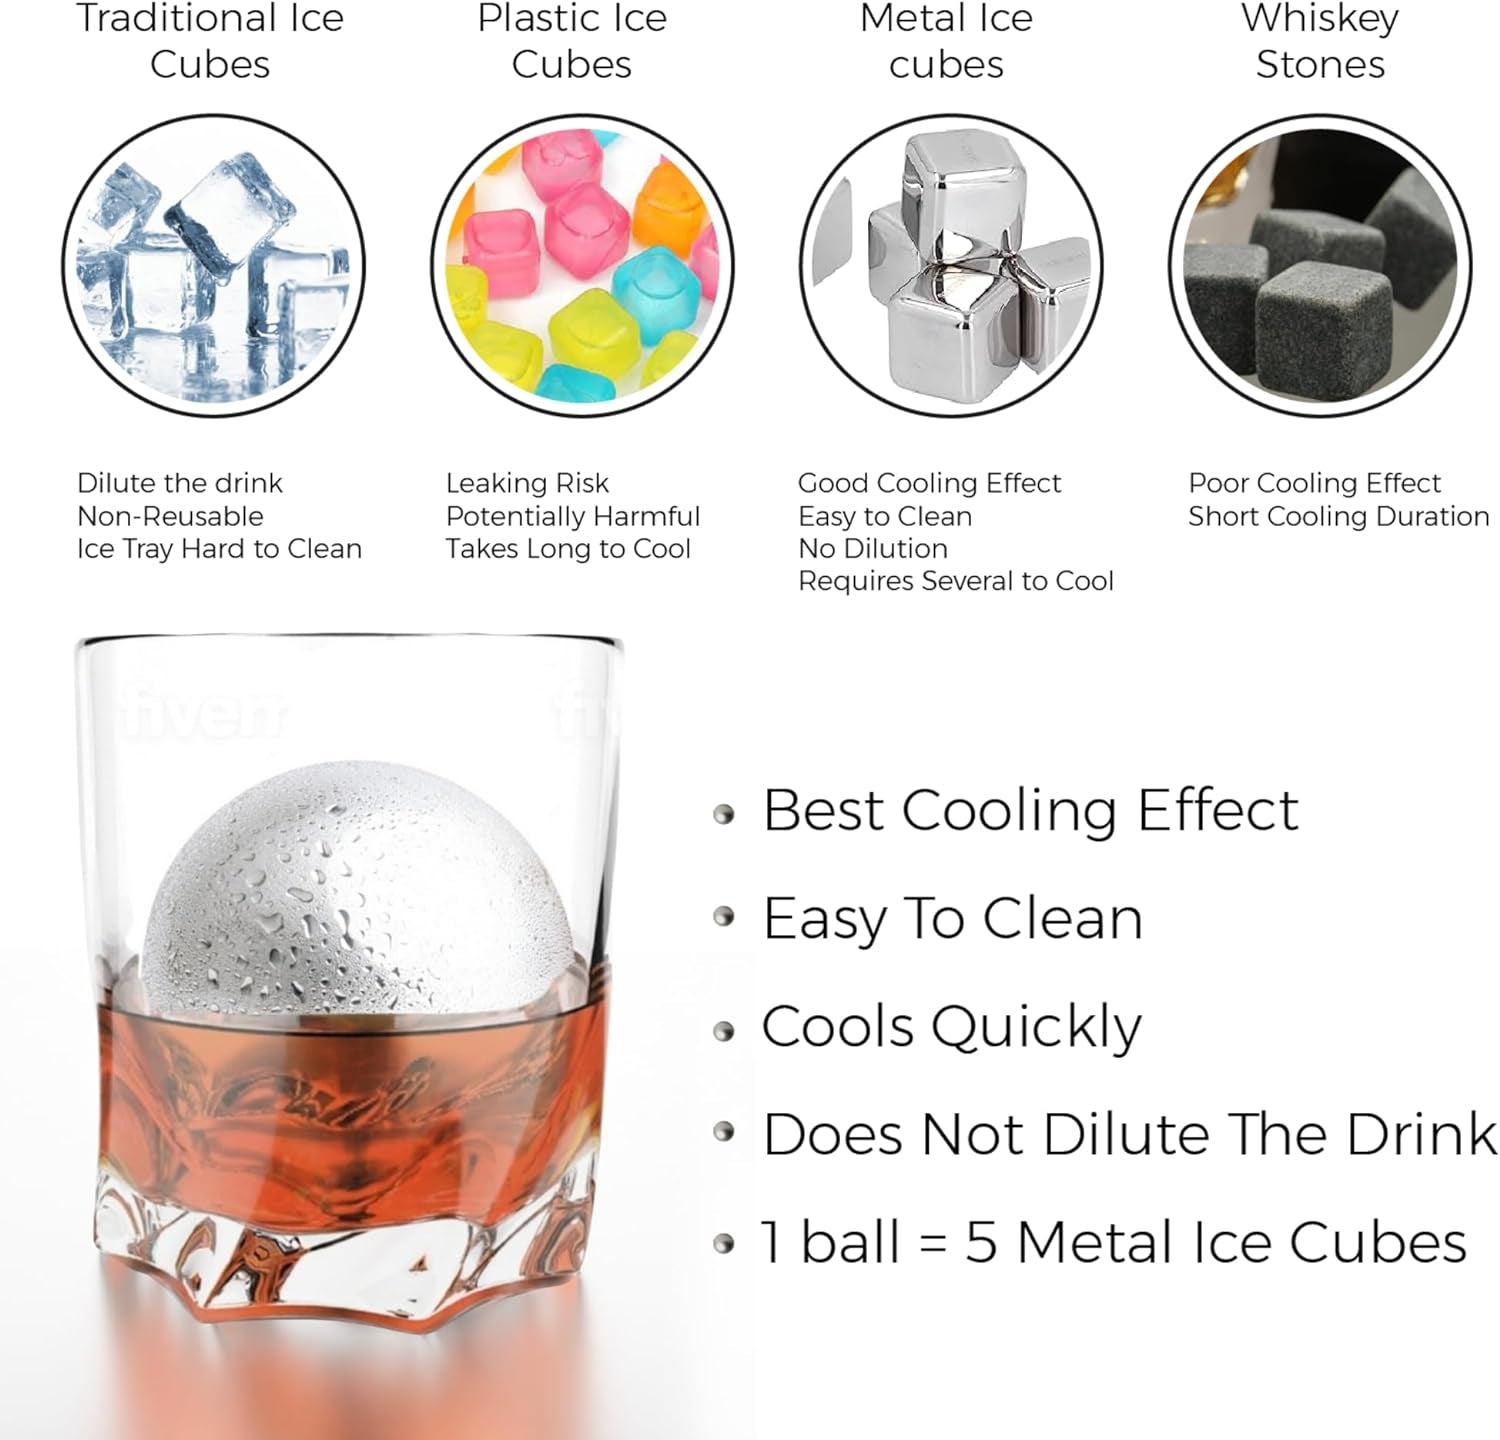 4 Premium XXL 55Mm Stainless Steel Ice Whiskey Balls with Freezer Tray and Resealable Pouch -Whiskey Rocks Chilling Stones, Whiskey Stone Ice Cube Balls, round Chilling Rocks